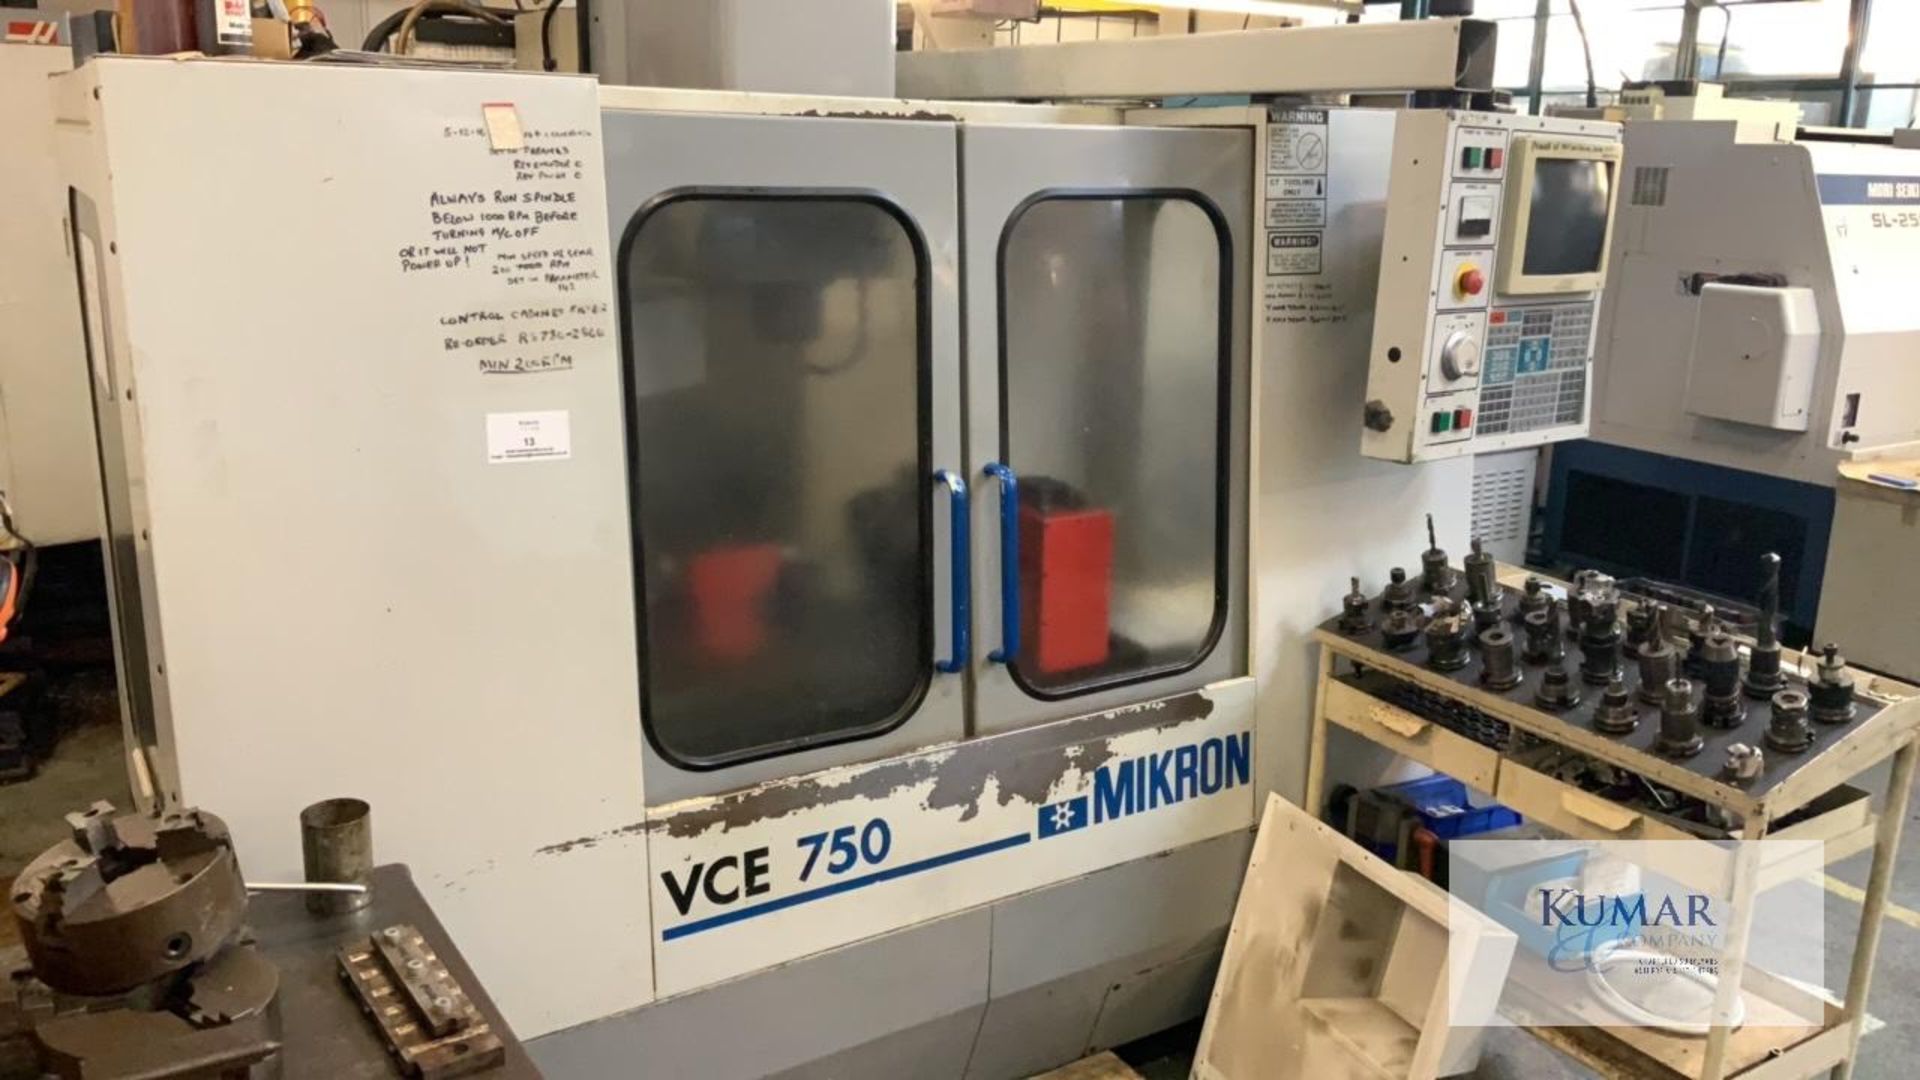 Mikron HAAS VCE 750 Machining Centre, Serial No: 11657, (09/97) with chucks as shown